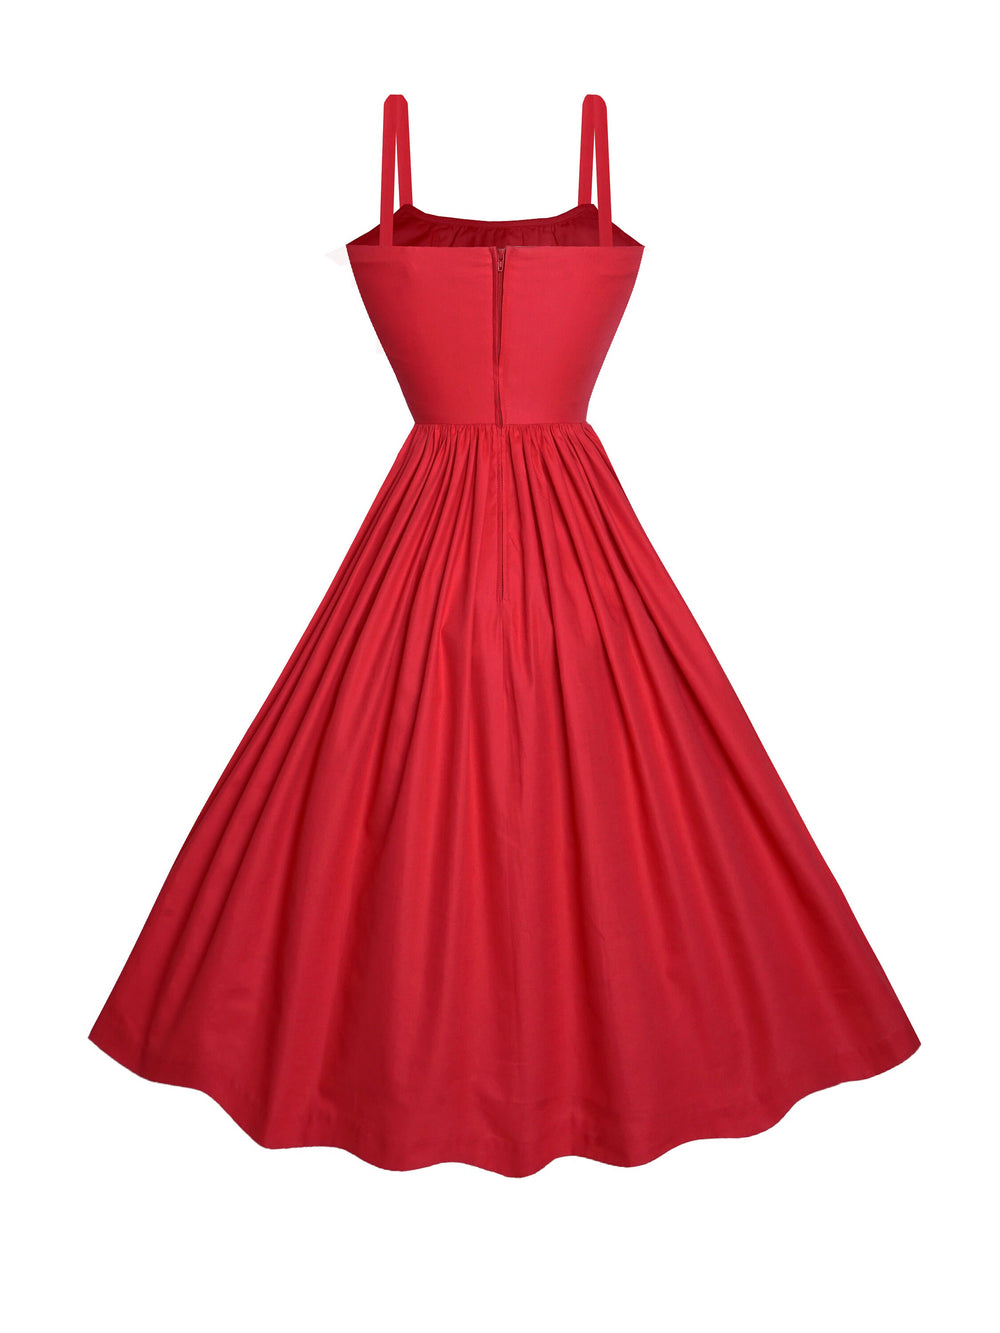 MTO - Grace Dress in Cardinal Red Cotton